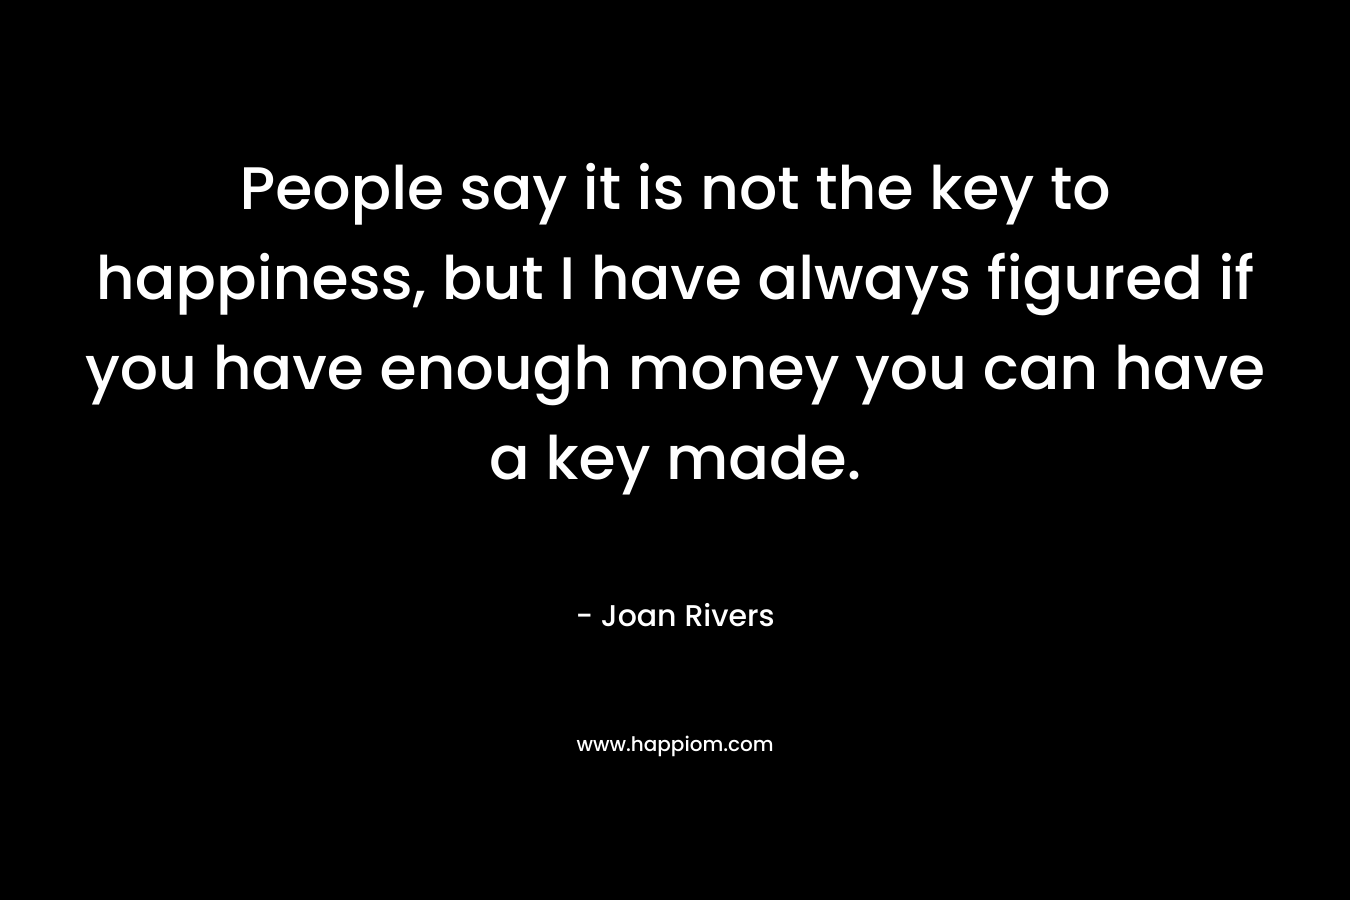 People say it is not the key to happiness, but I have always figured if you have enough money you can have a key made.